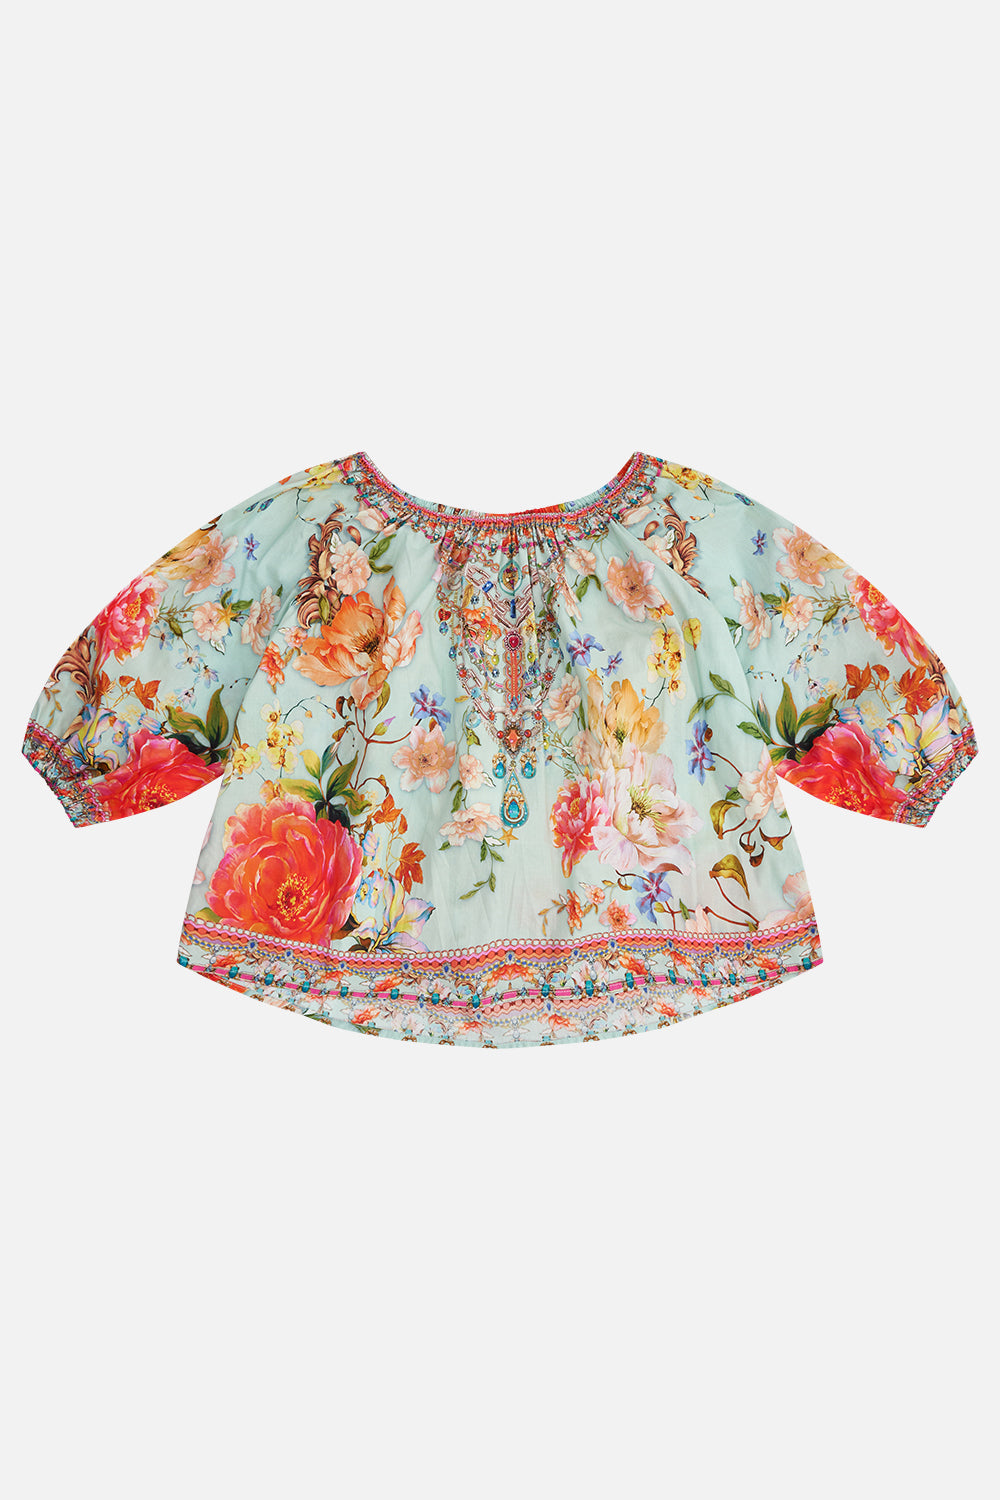 Product view of MILLA By CAMILLA kids floral blouse in Talk The Walk print 